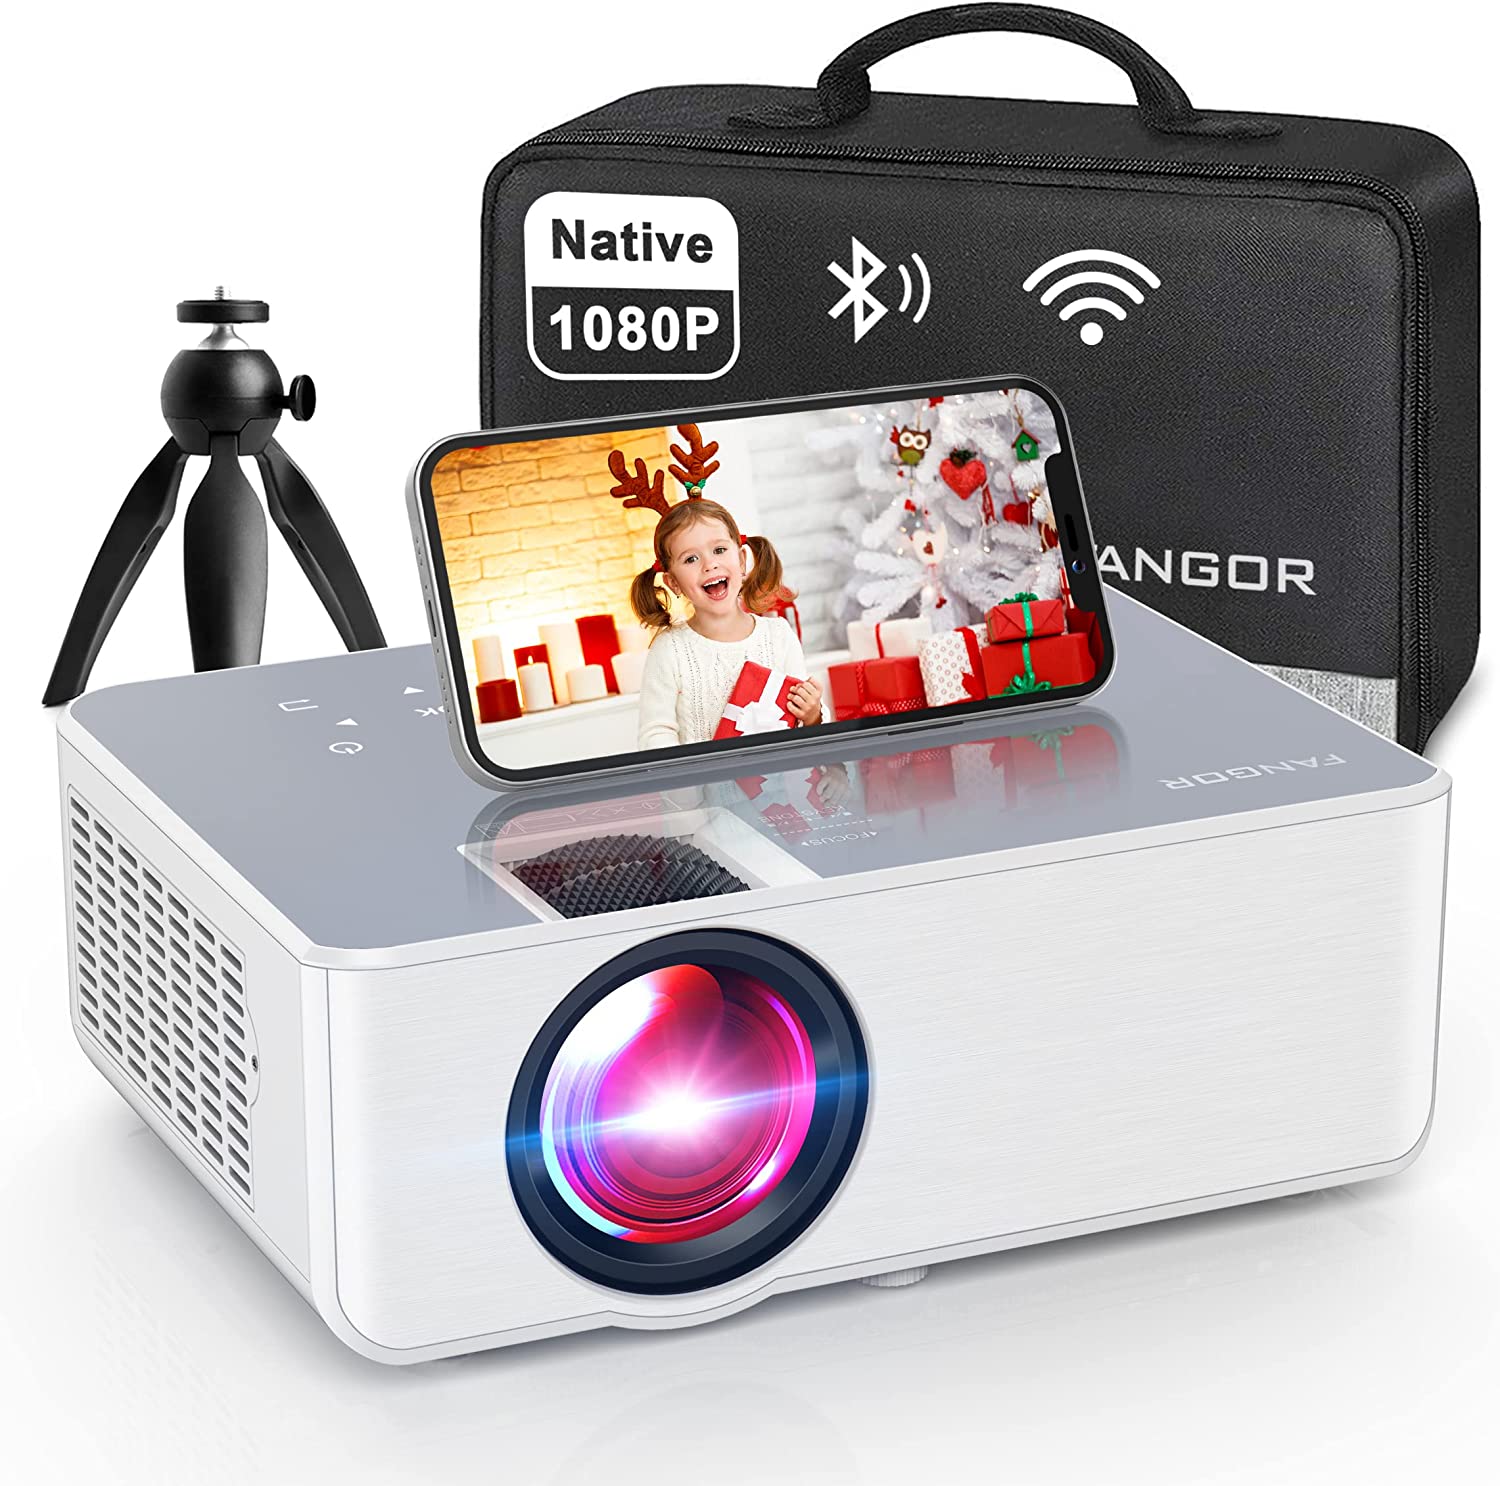 1080P HD Projector, WiFi Projector Bluetooth Projector, FANGOR 230 Portable Movie Projector with Tripod, Home Theater Video Projector